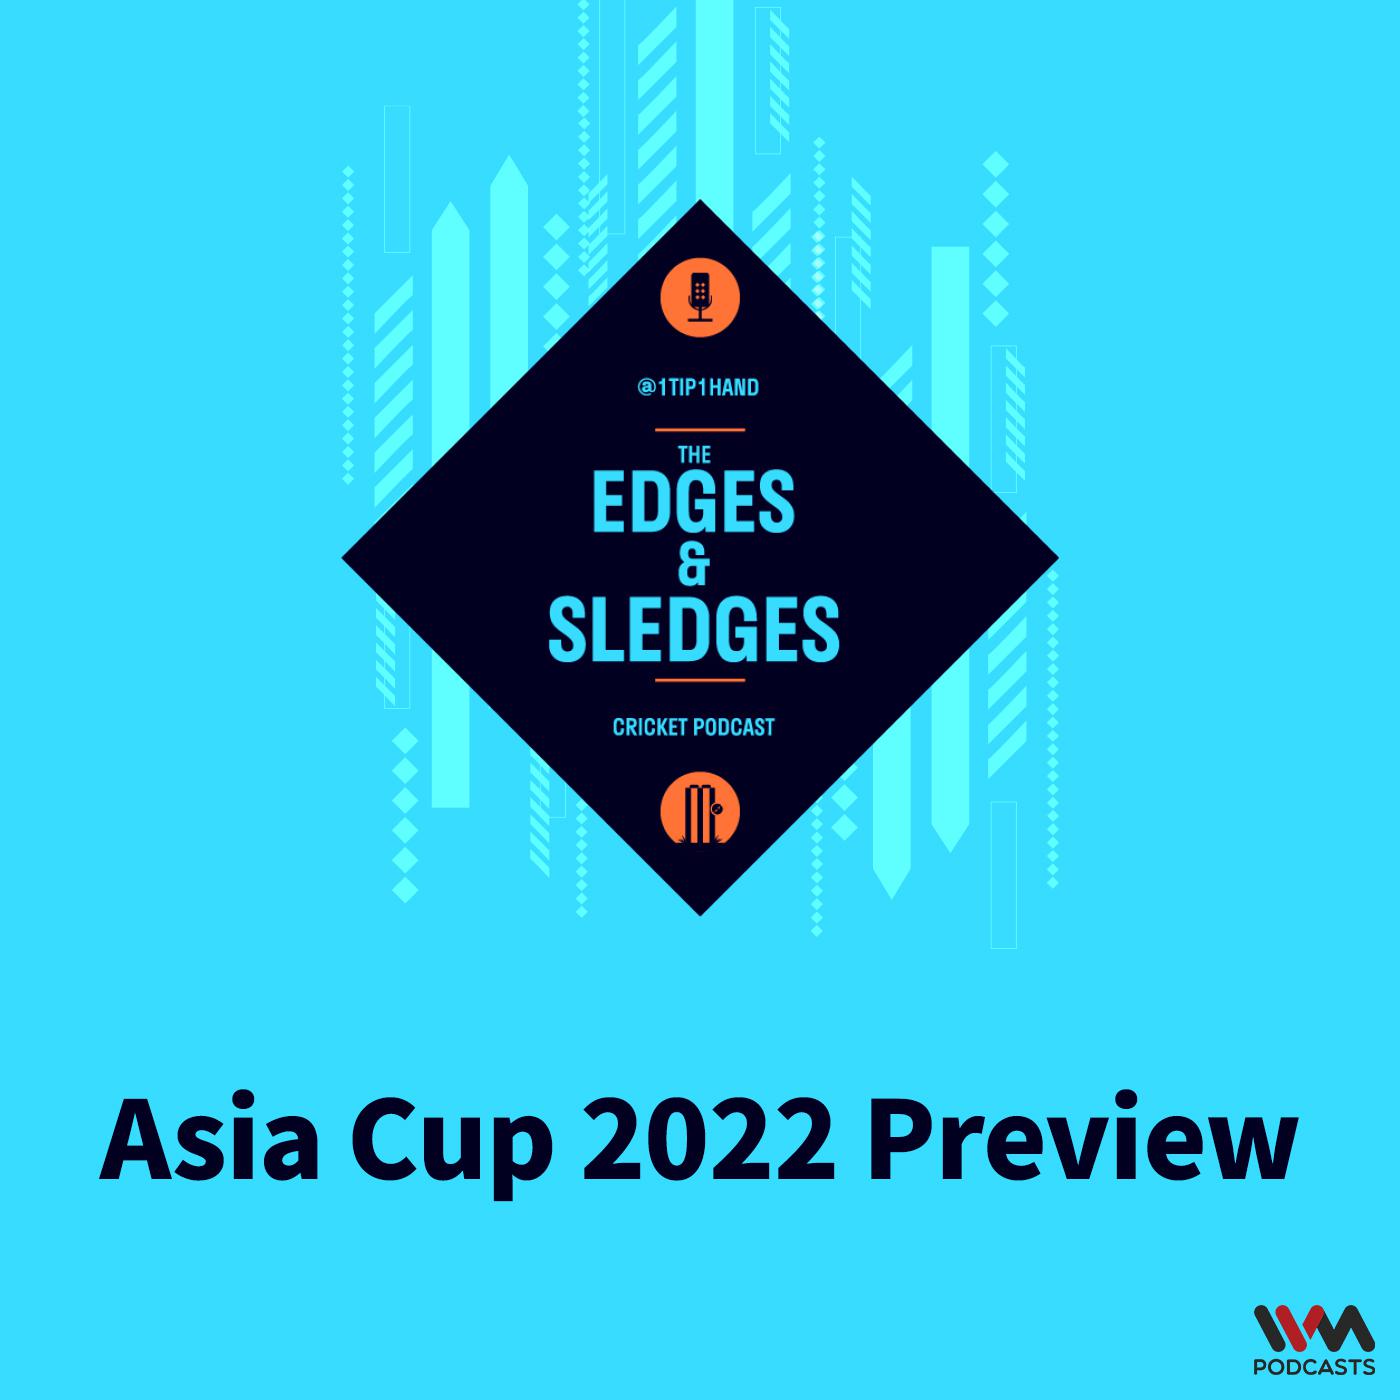 Asia Cup 2022 Preview